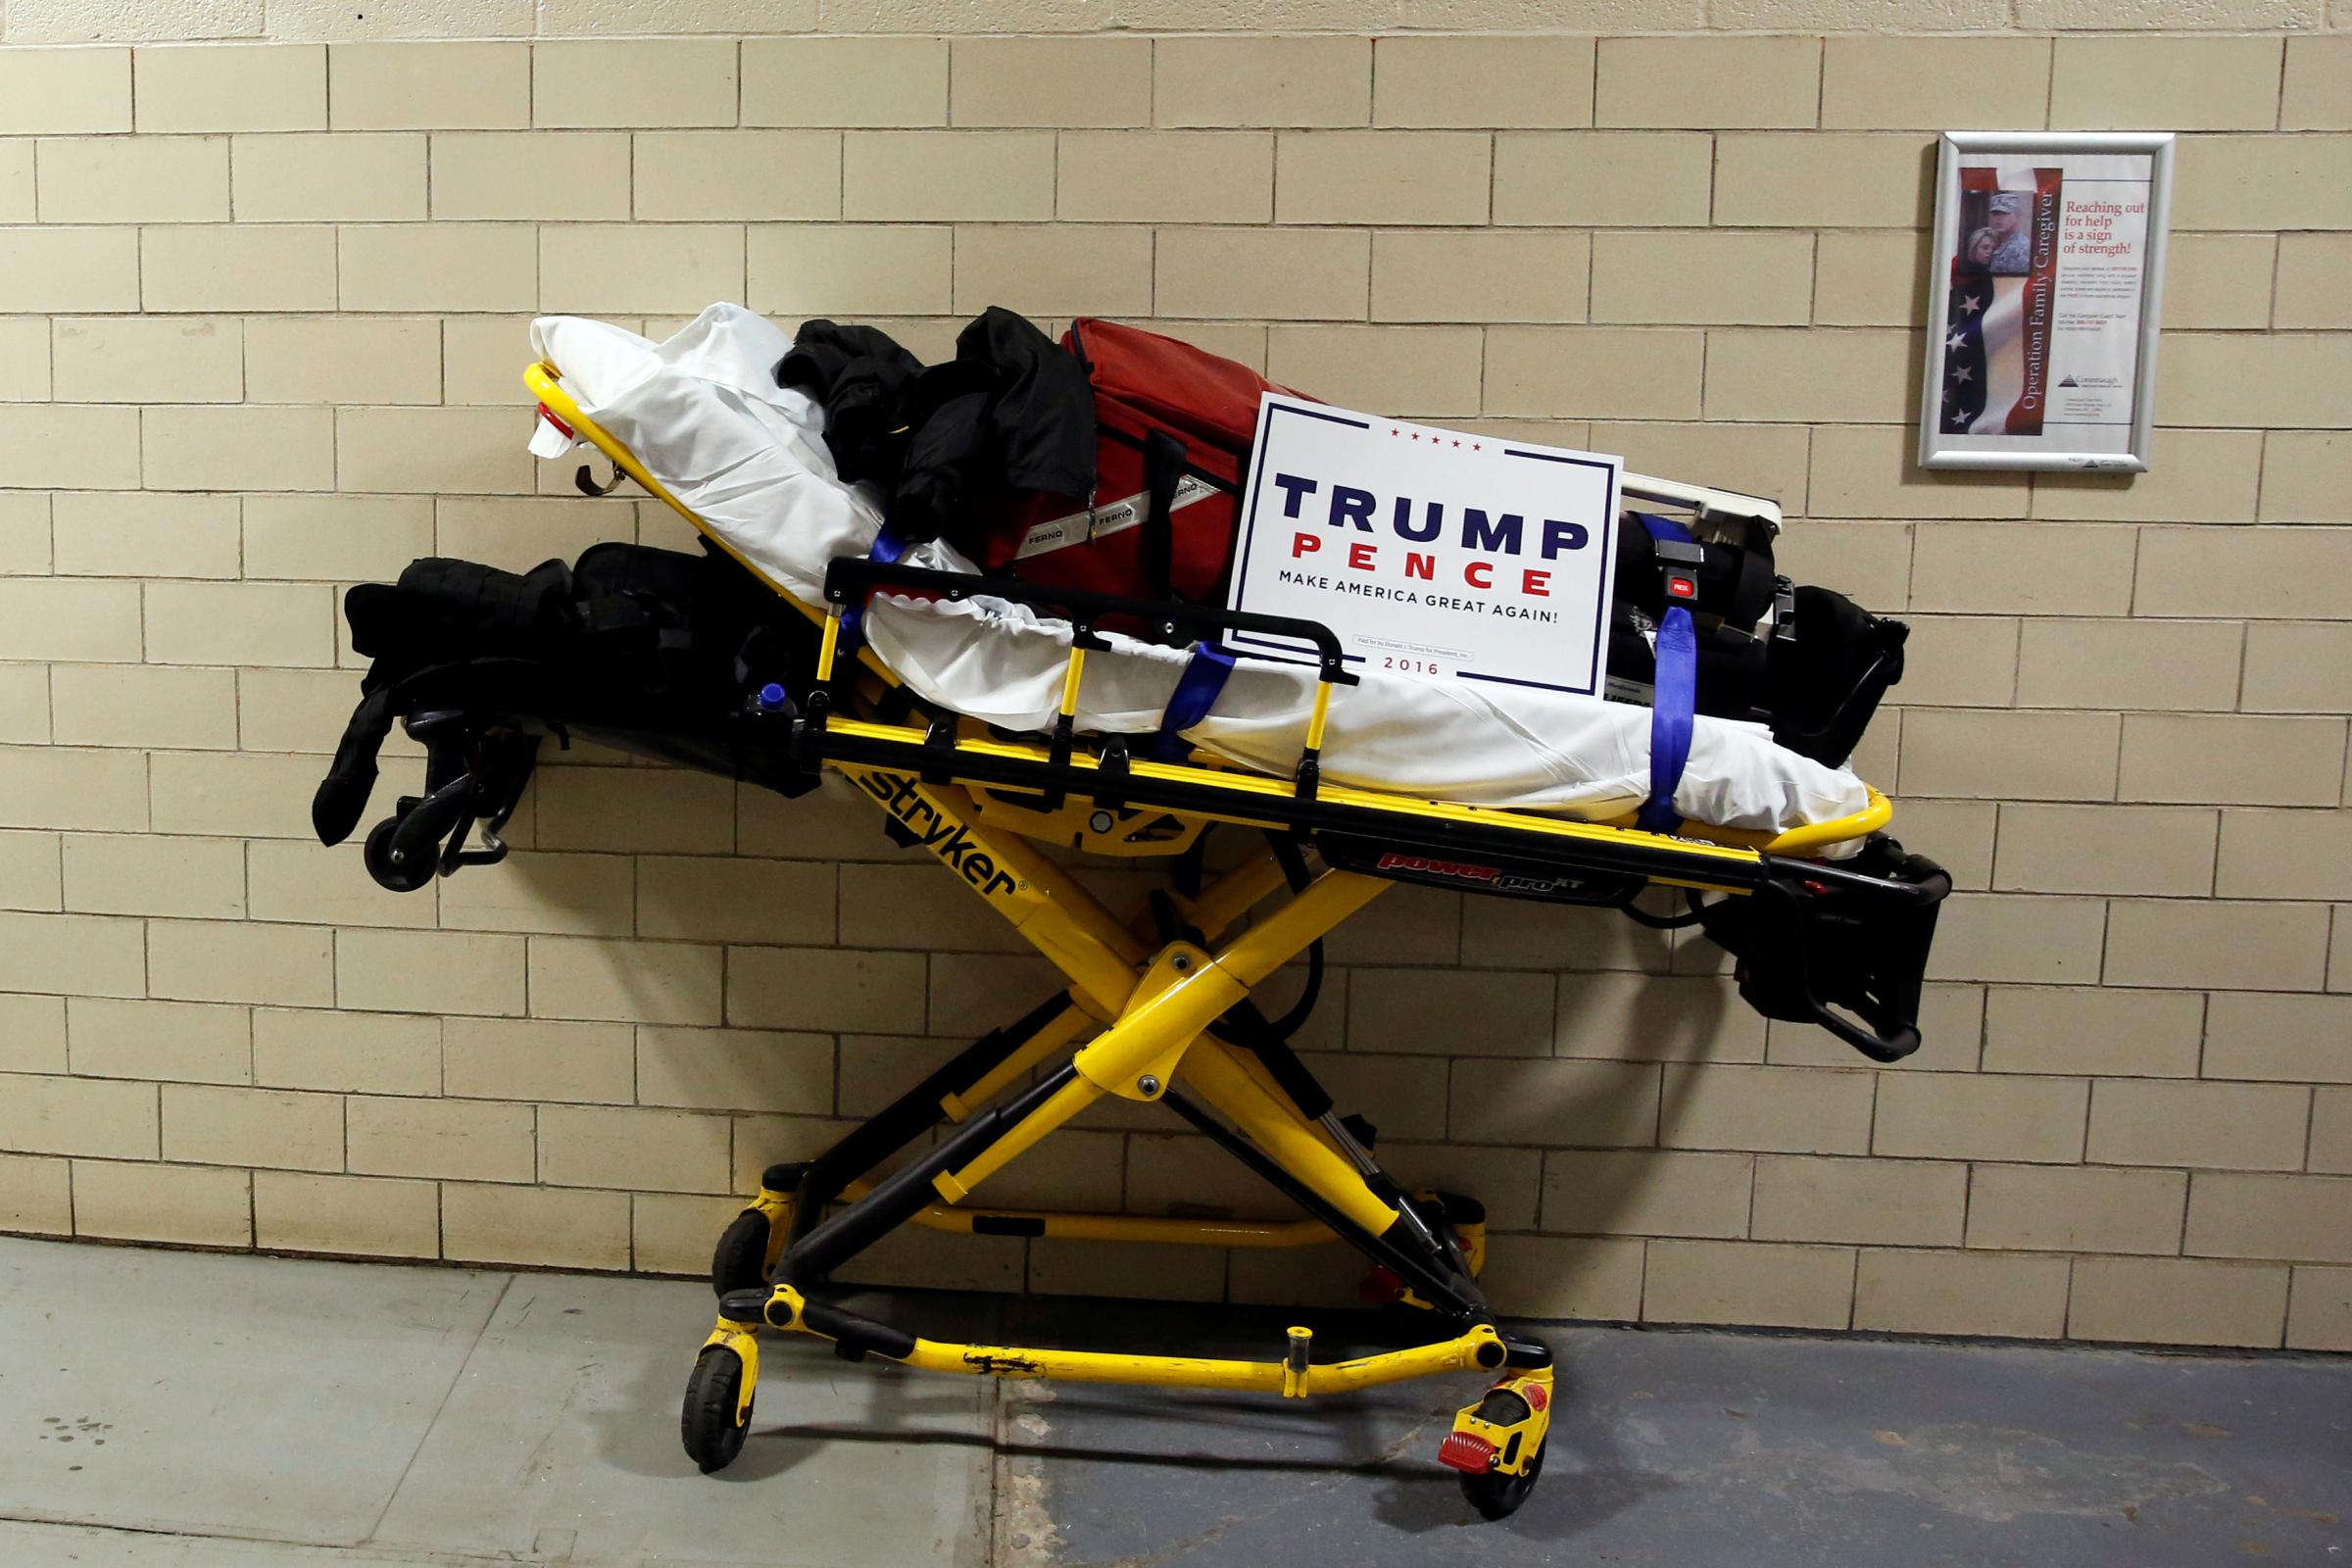 A paramedic's stretcher sits backstage with a Trump campaign sign on it as Trump holds a rally in Johnstown, Pennsylvania